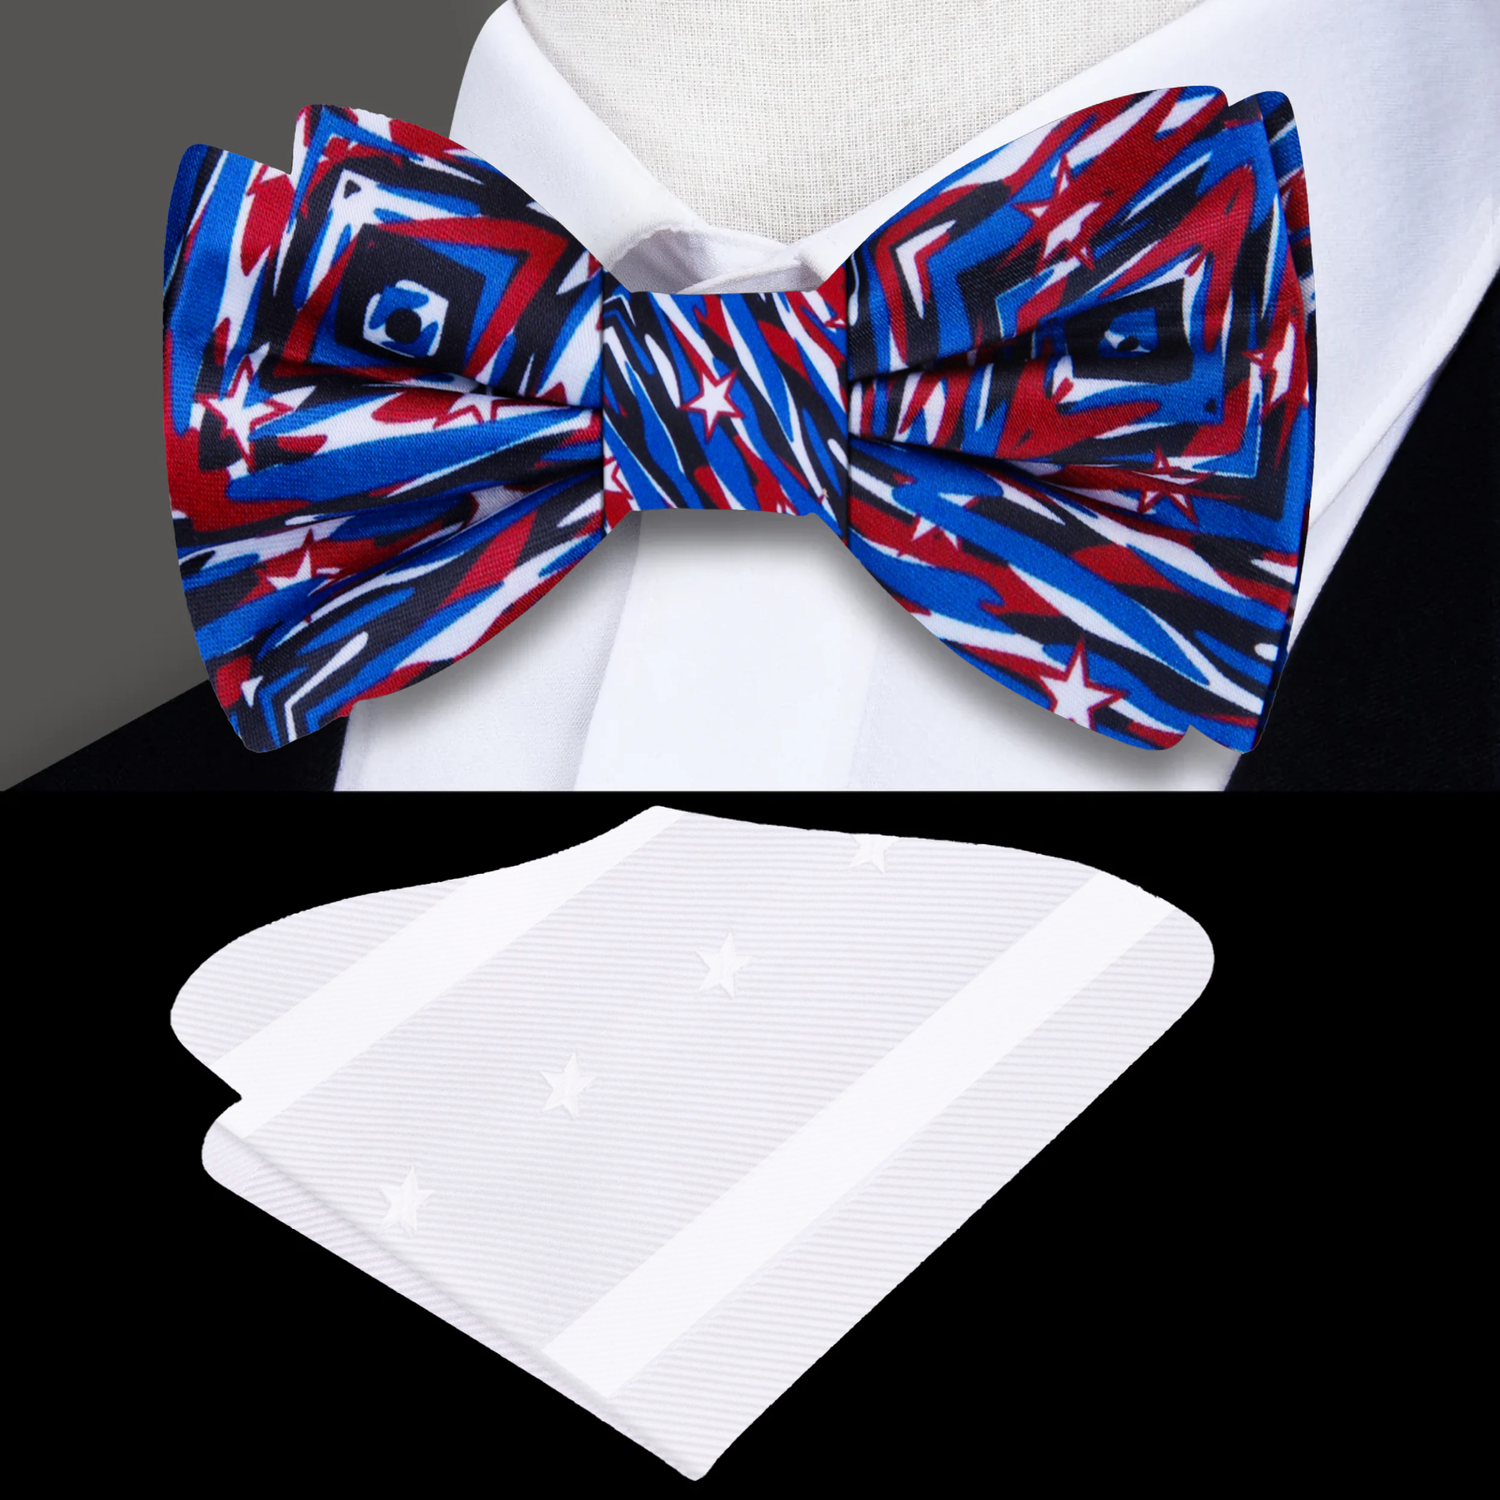 Blue, Red, Black White Abstract Shapes and Stars Bow Tie and Pocket SquareBlue, Red, Black White Abstract Shapes and Stars Bow Tie and Accenting Pocket Square